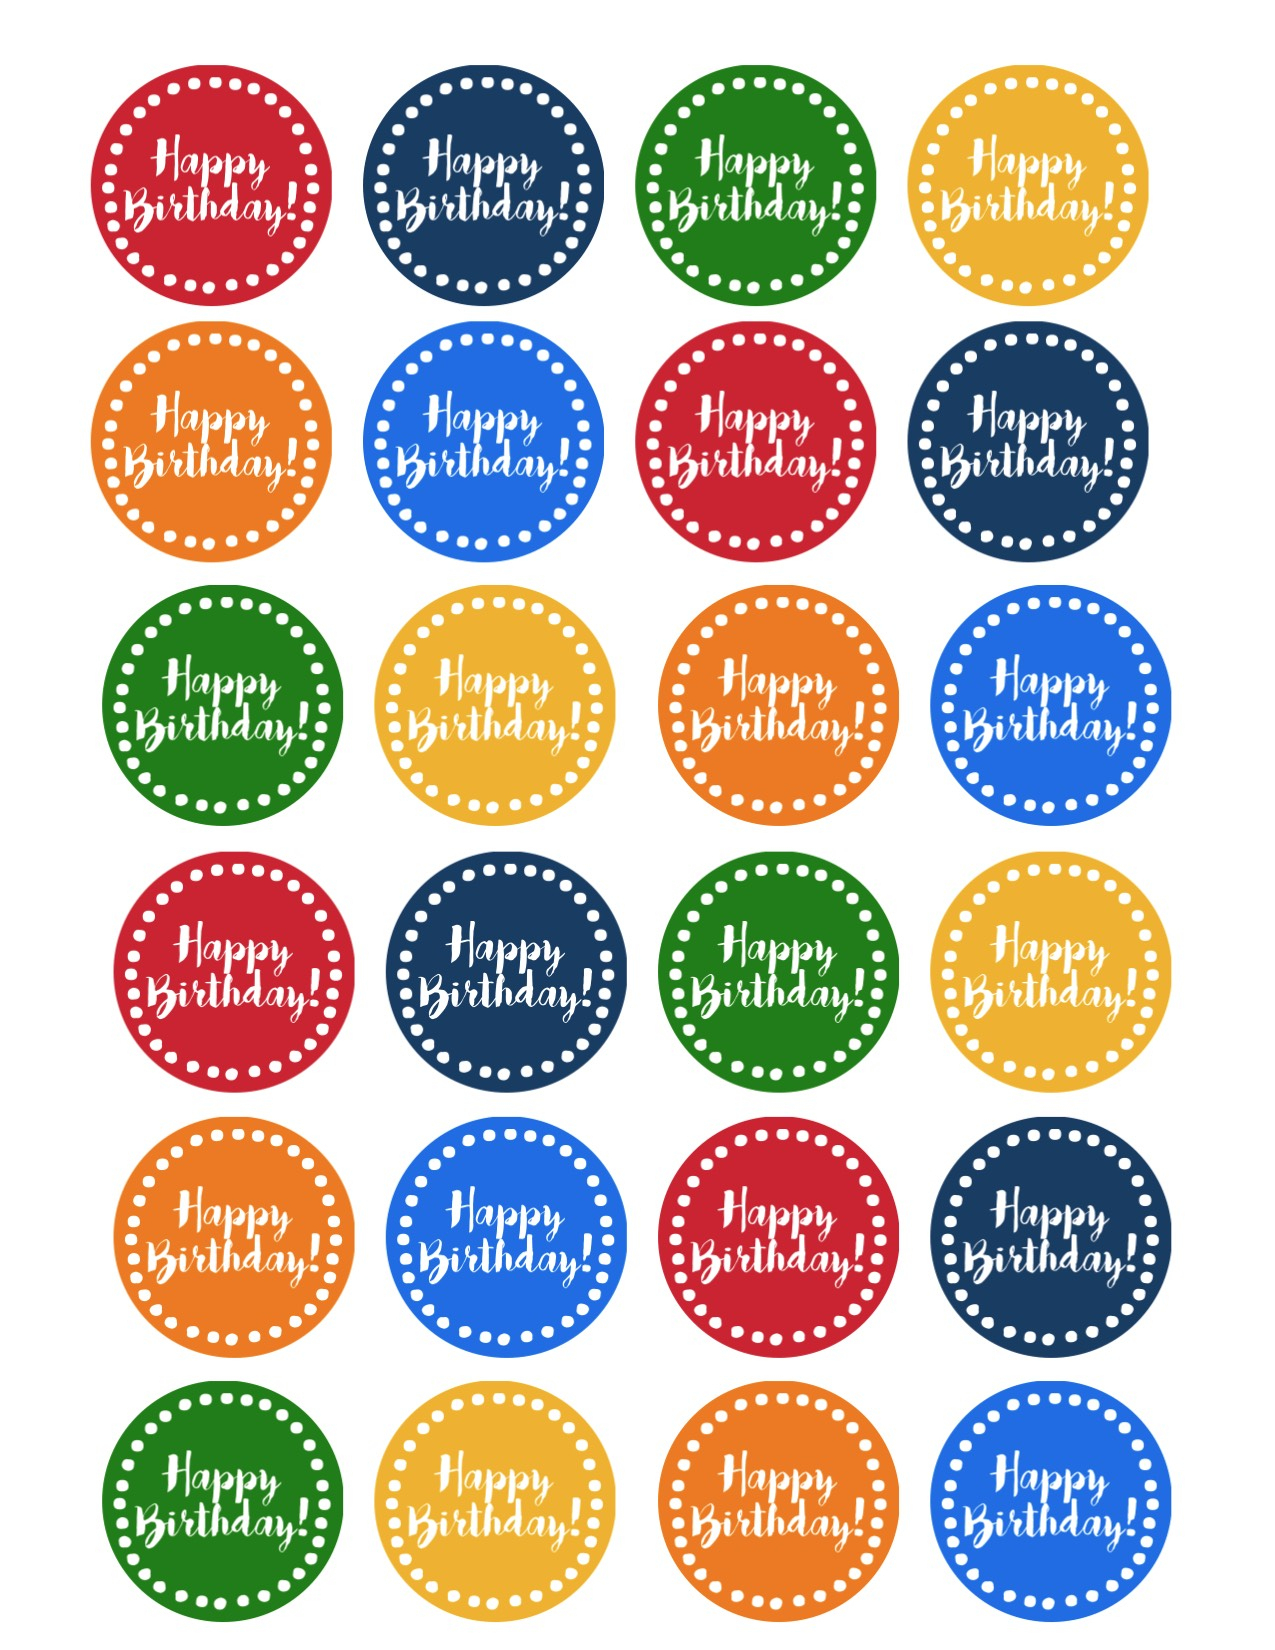 Happy Birthday Cupcake Toppers Free Printable - Paper Trail Design - Cupcake Flags Free Printable